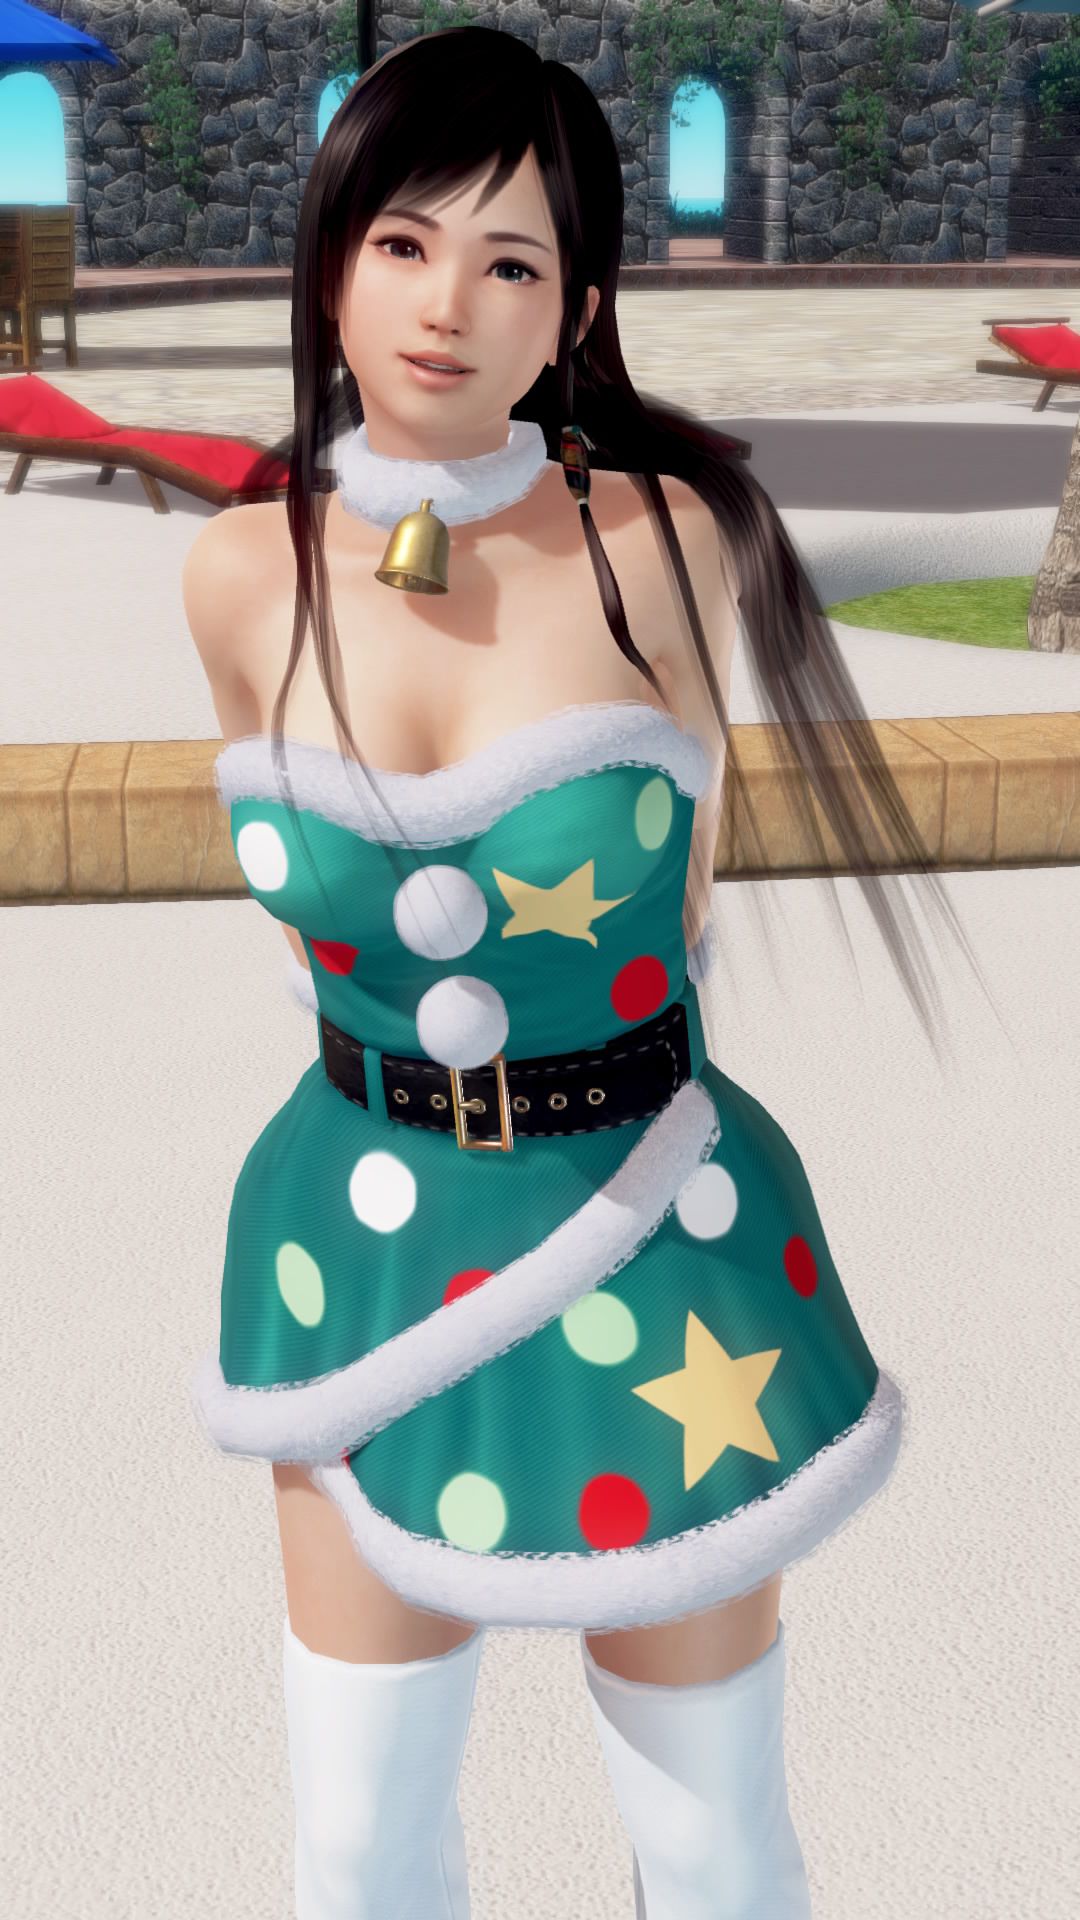 Merry Xmas from DOAX3 South Island! Photo session with new swimsuit Santa 43